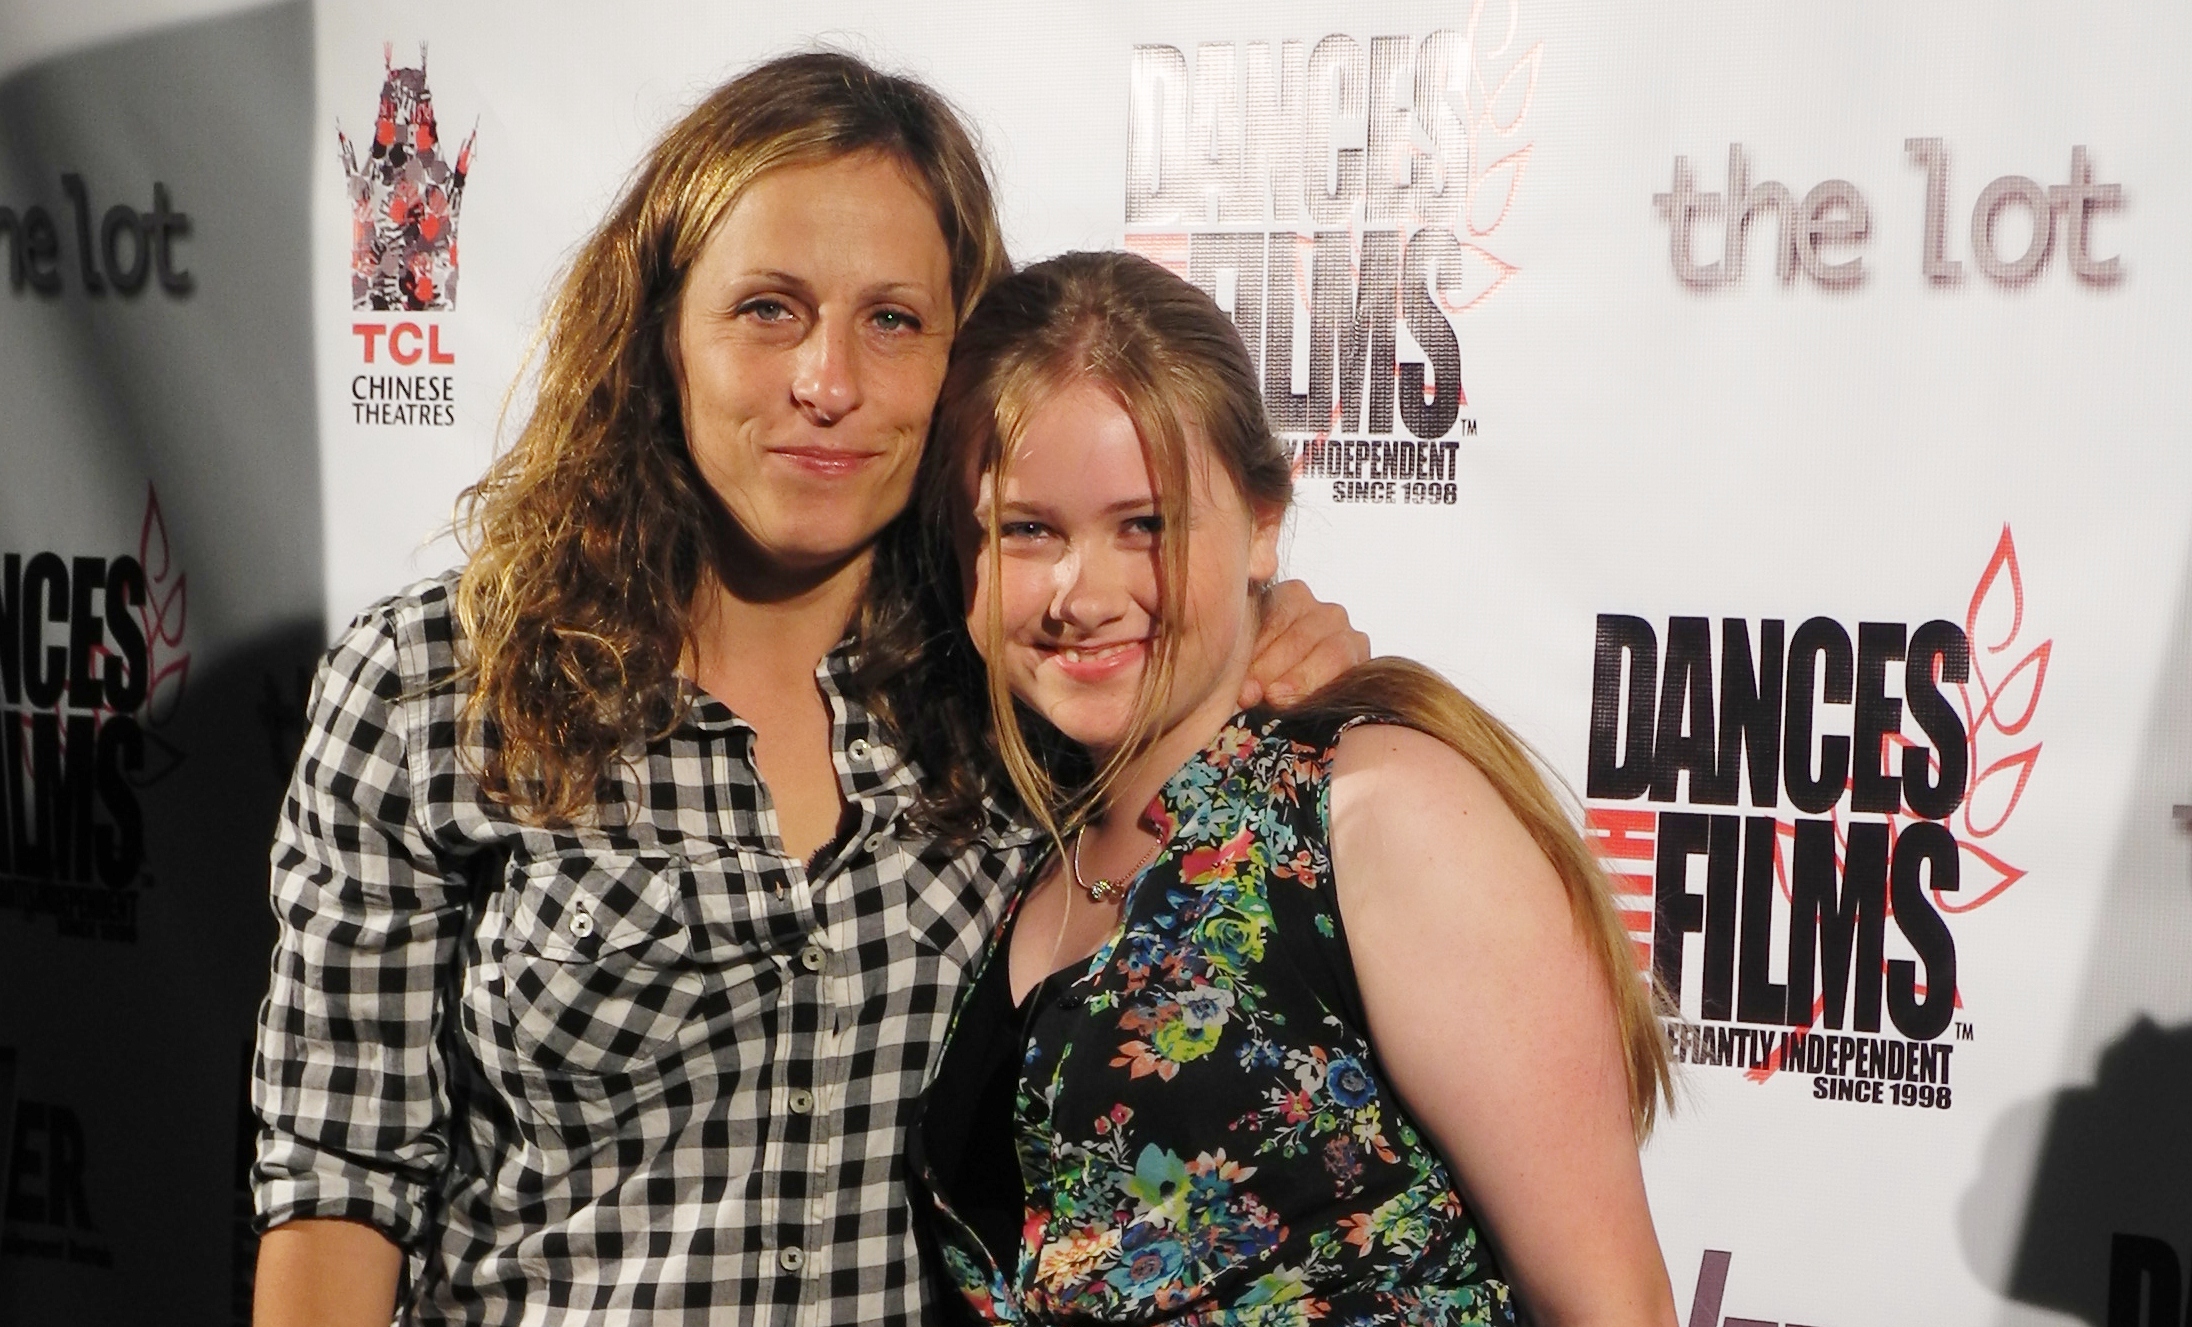 Janine Sides and Kaitlin Morgan at the 2013 Dances With Films Film Festival